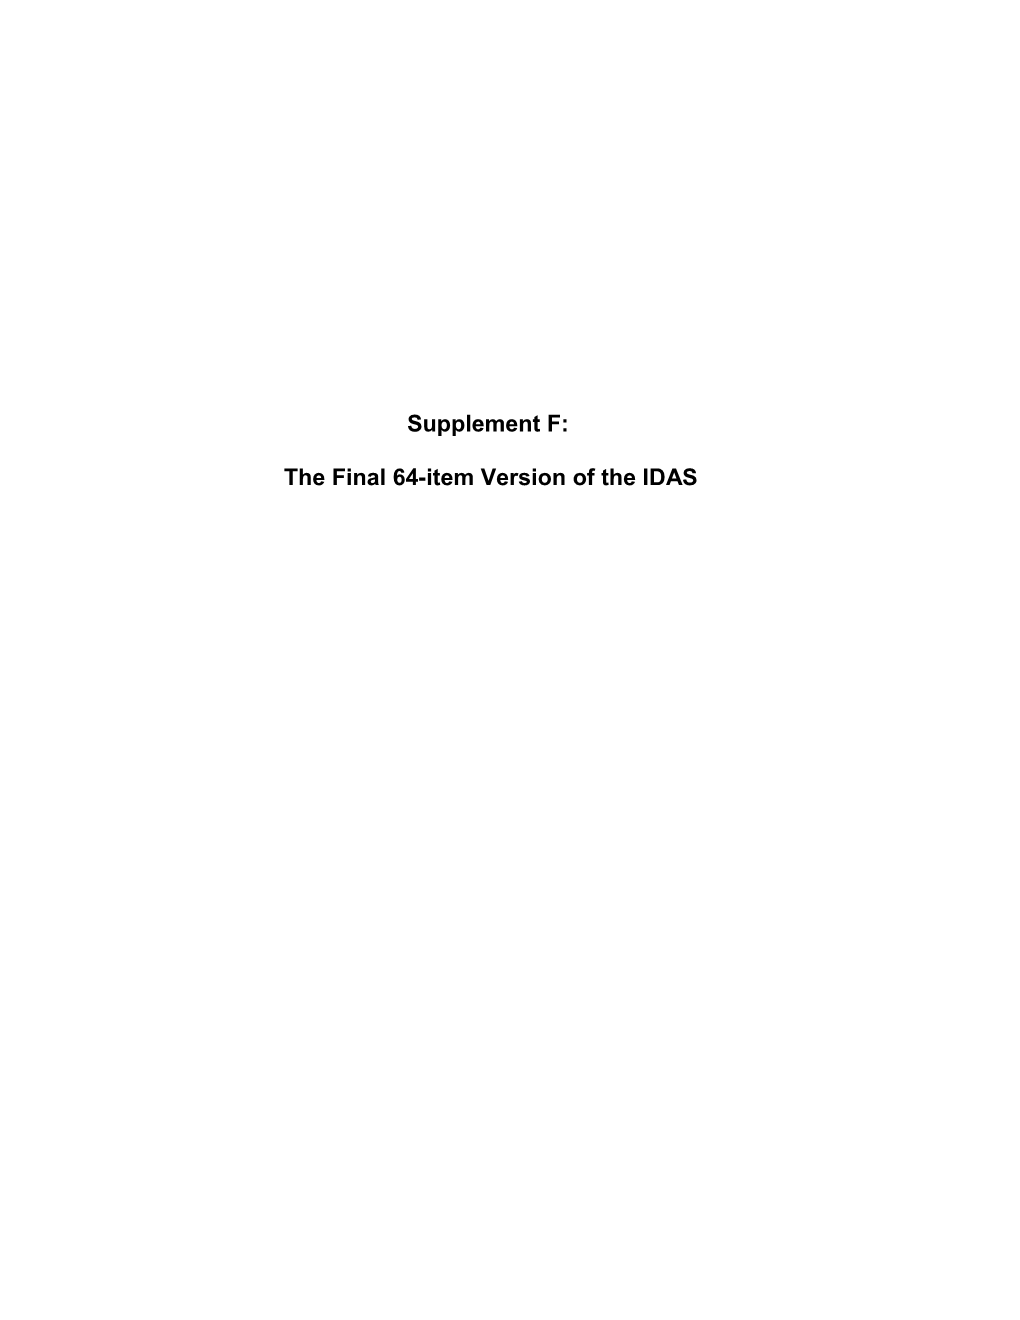 The Final 64-Item Version of the IDAS